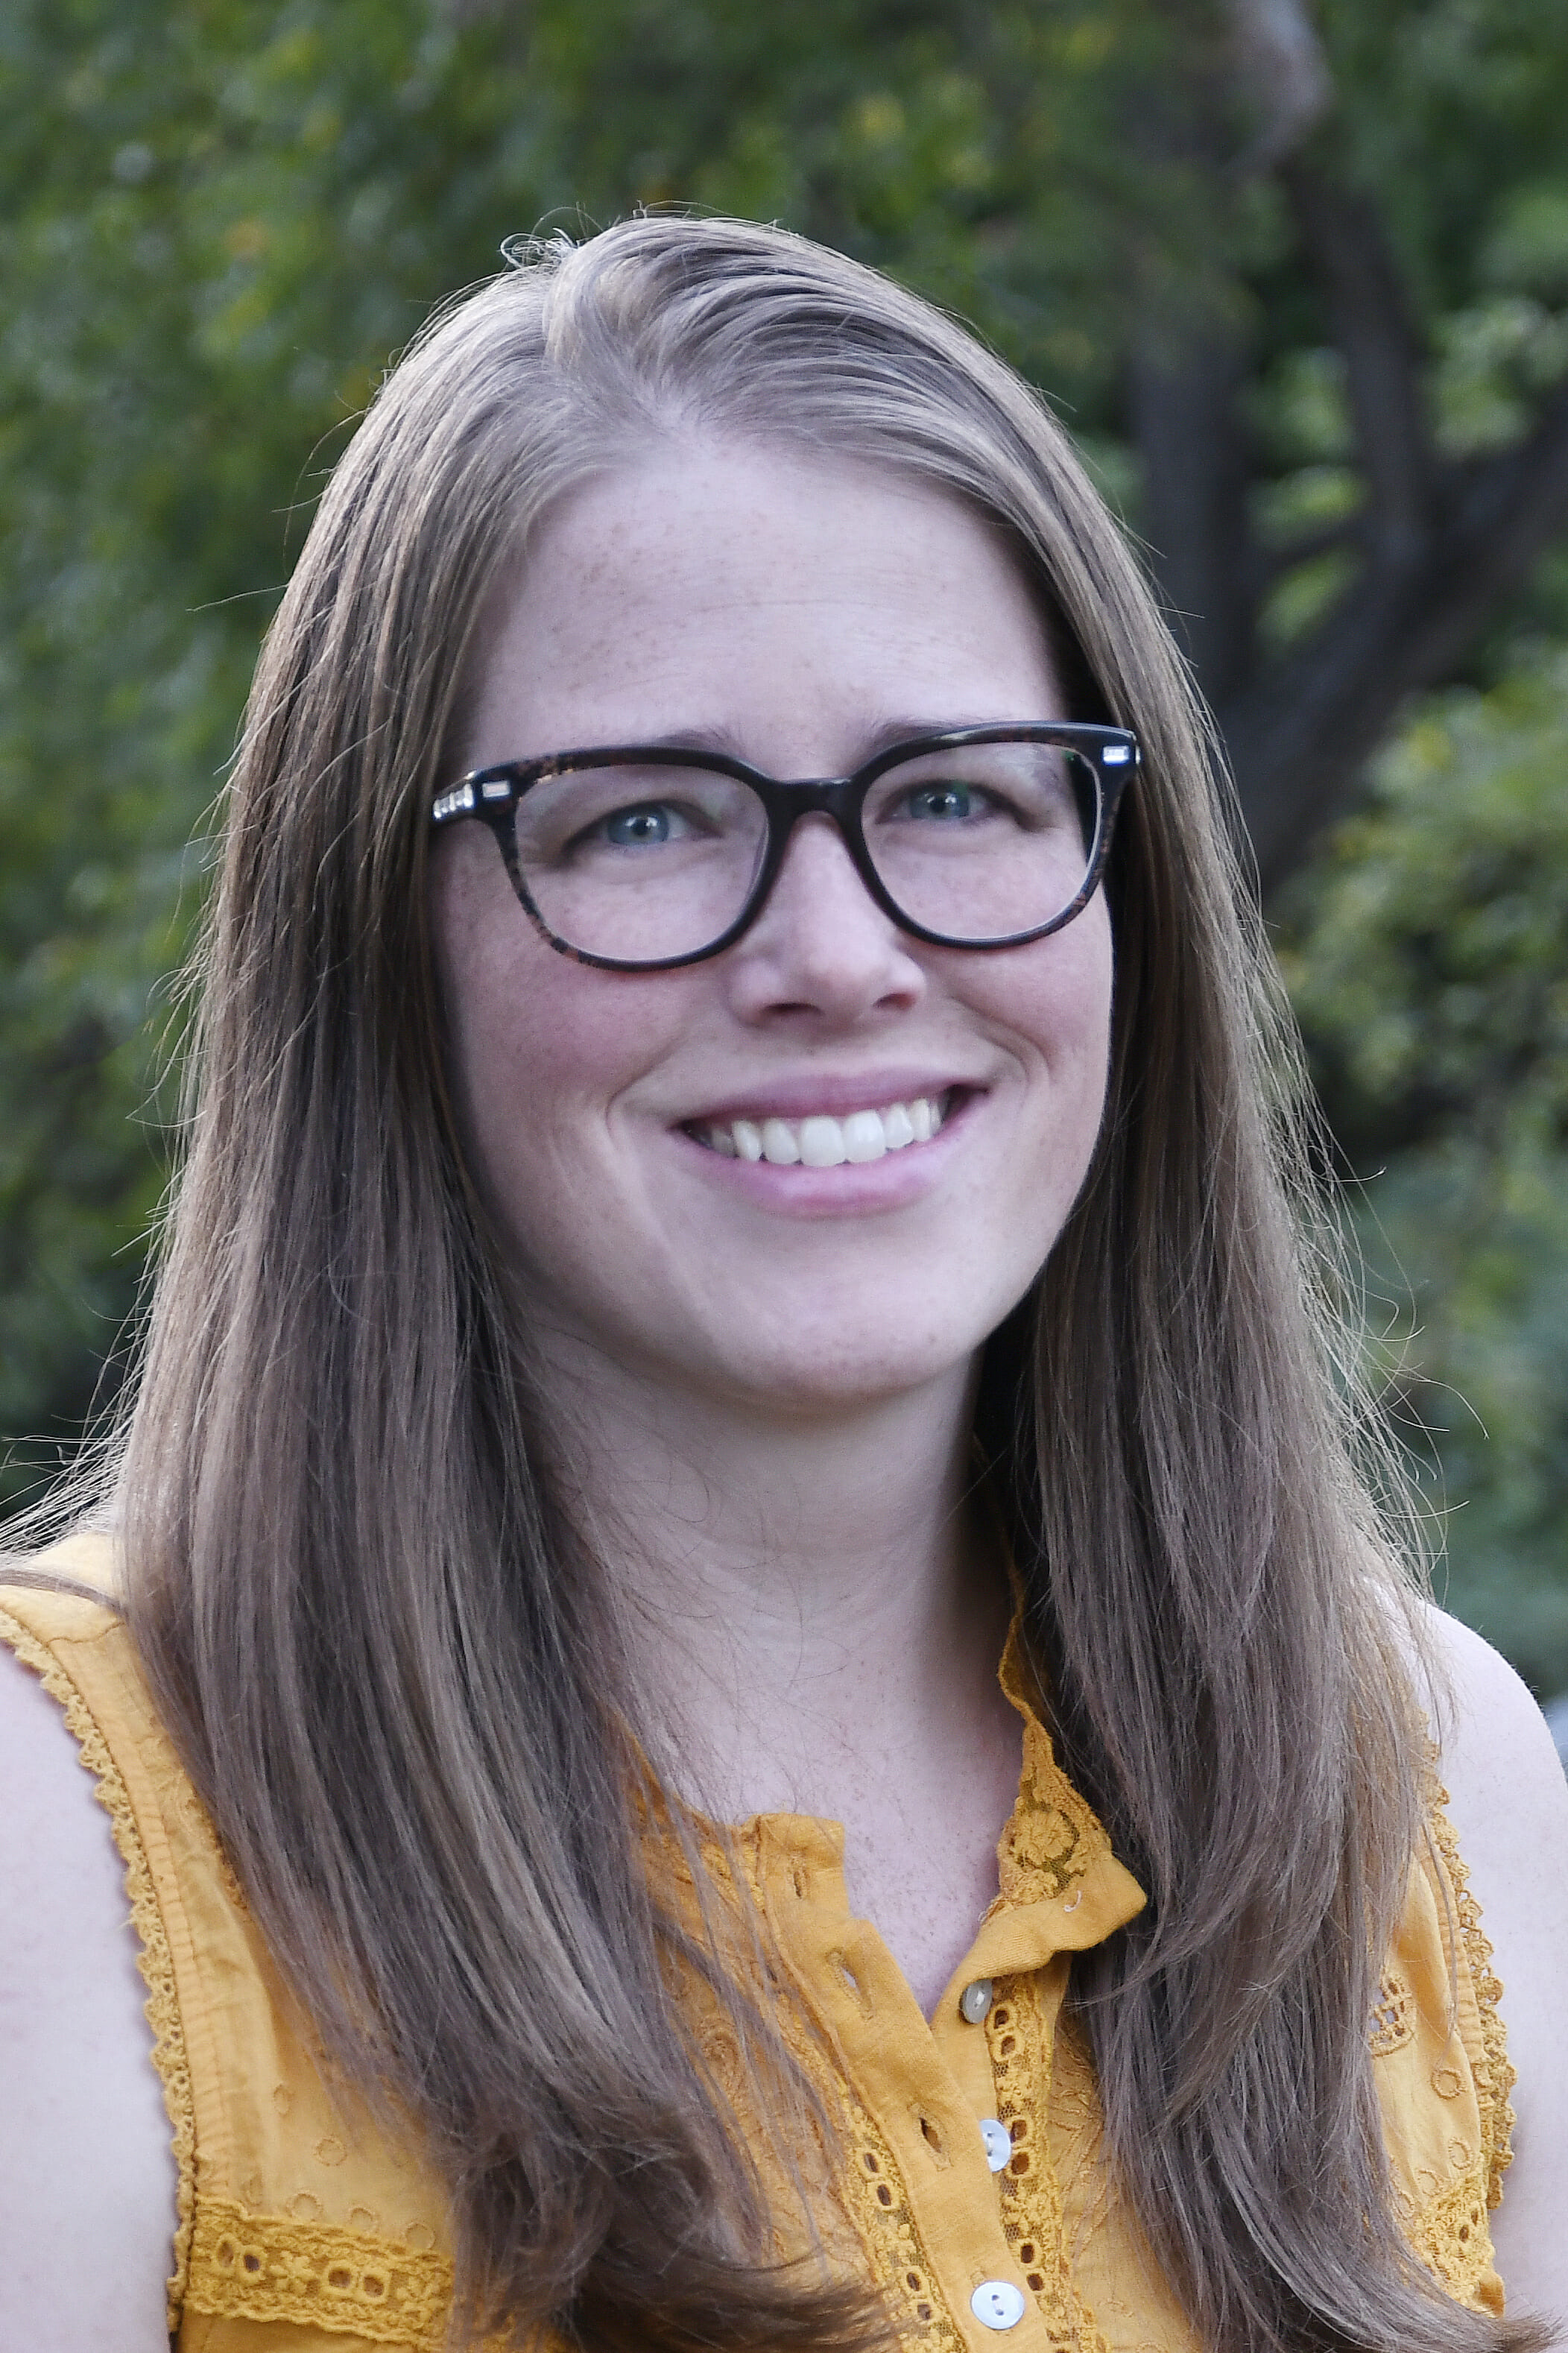 Headshot of Ashley Horst smiling and looking at the camera wearing glasses.